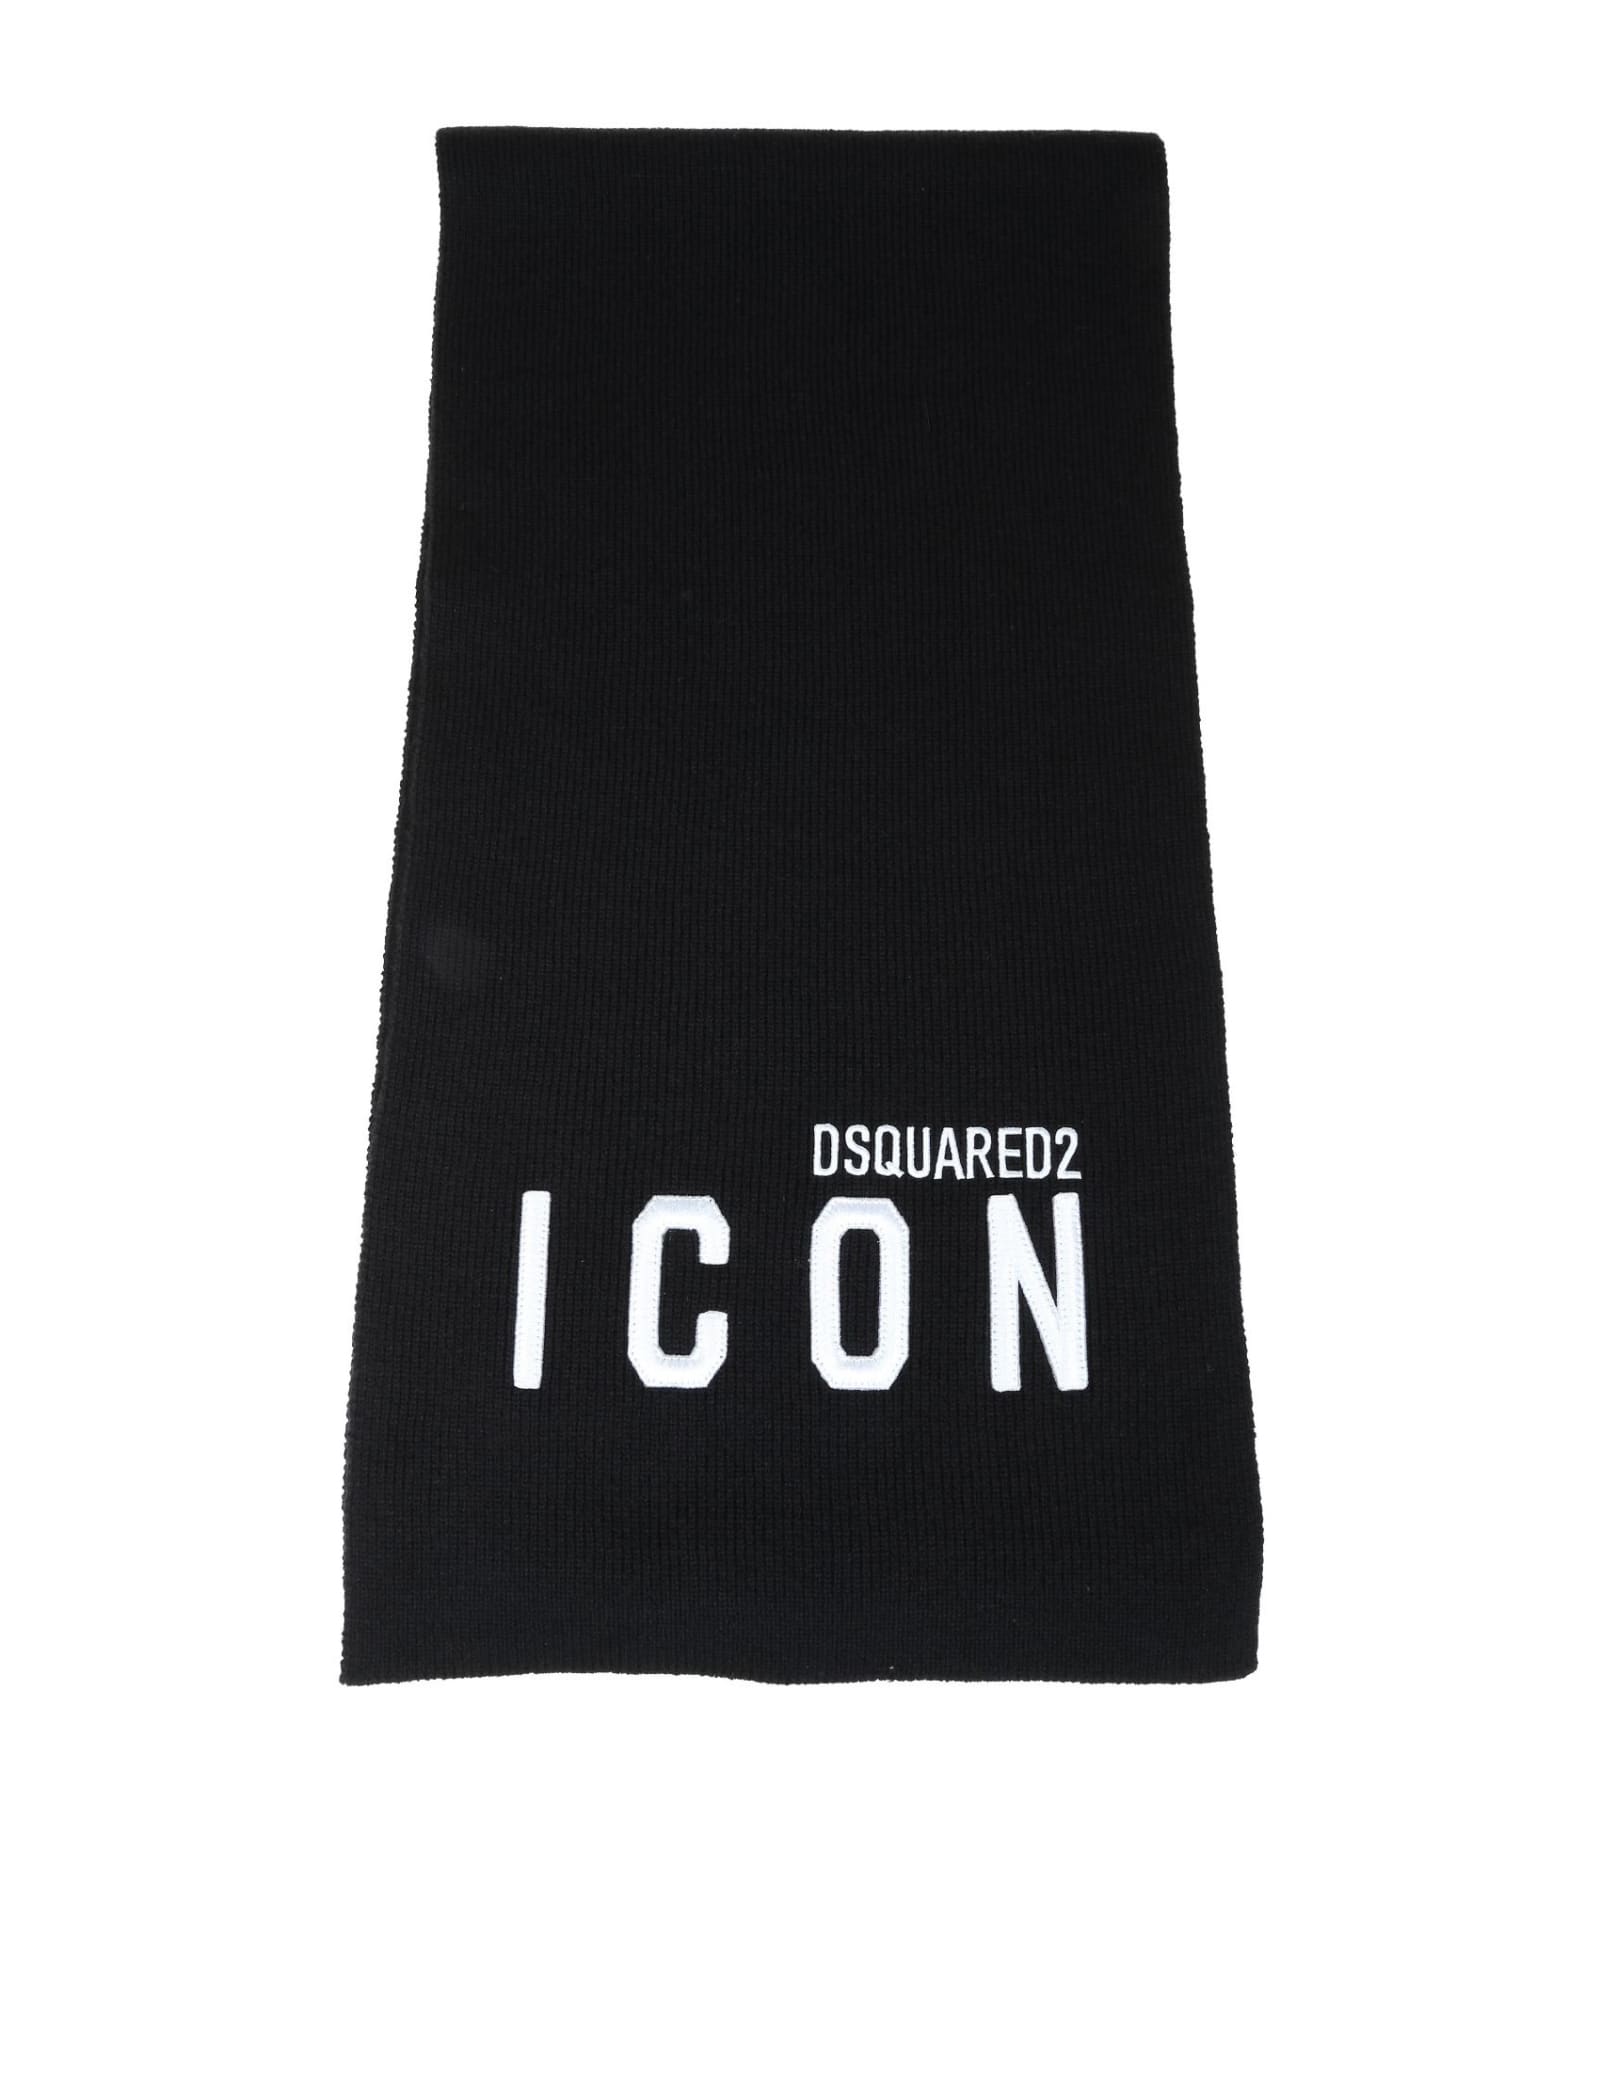 Dsquared2 Black Wool Scarf